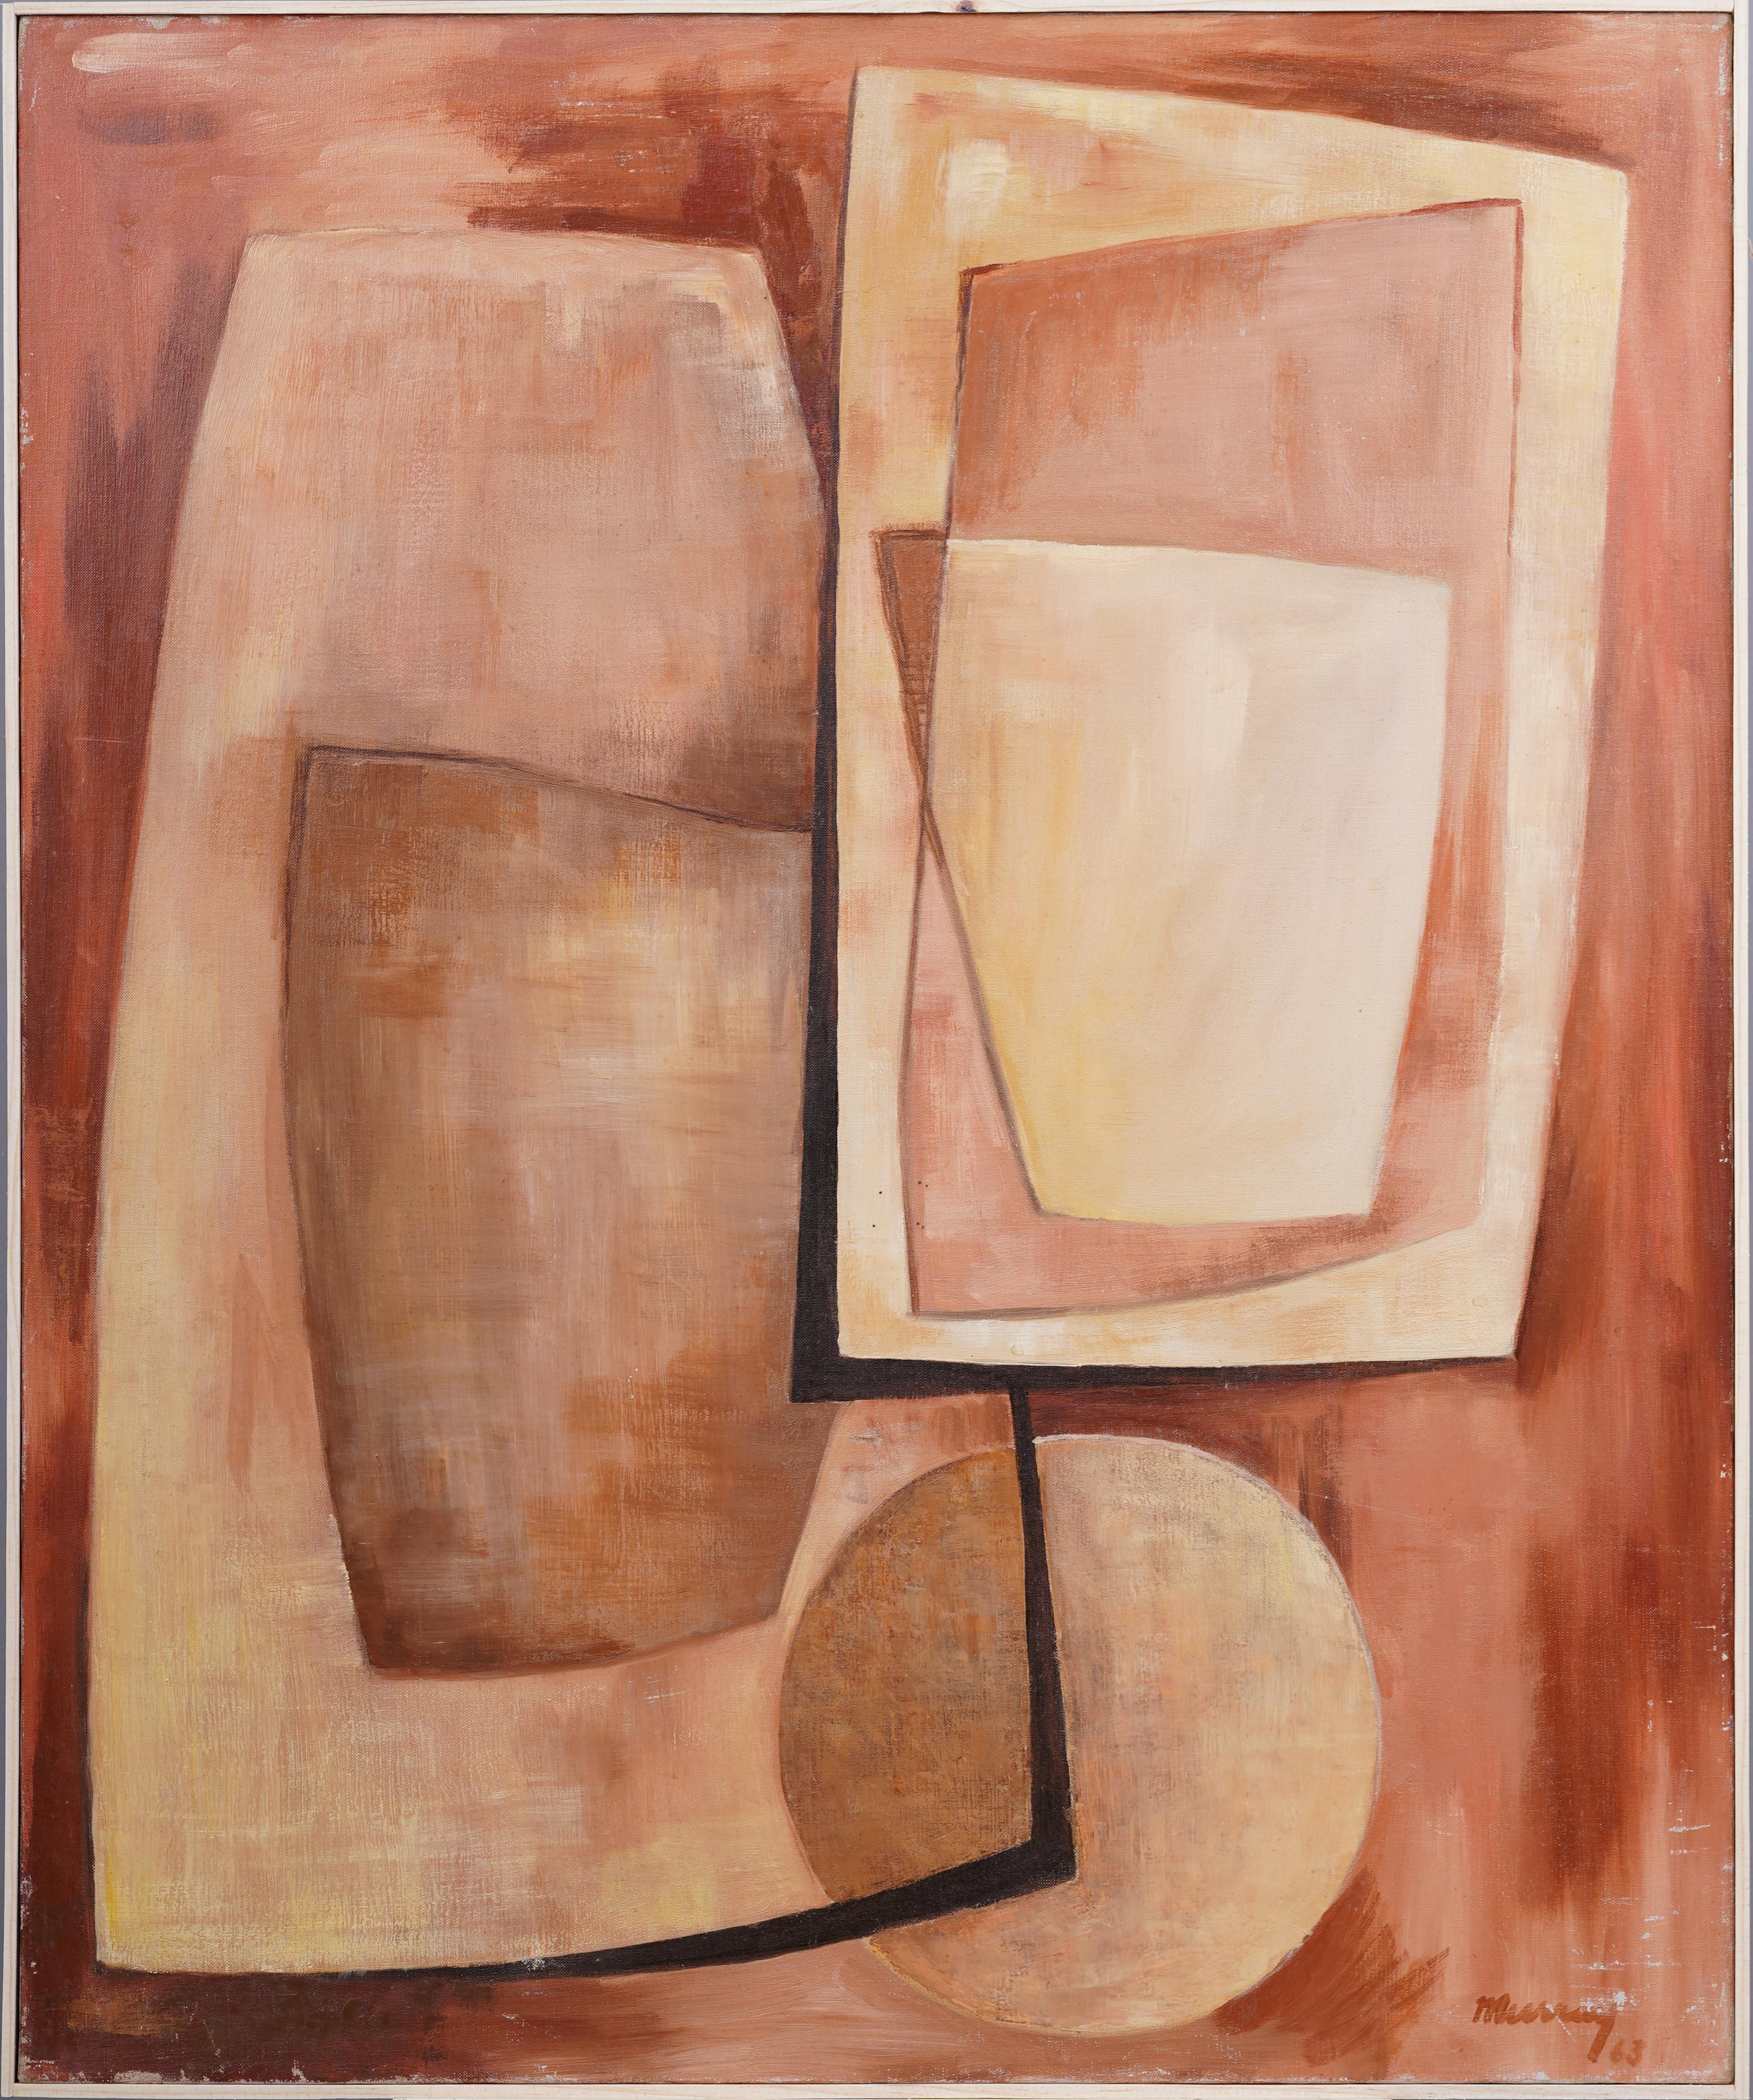 Impressive 1963 modernist painting.  A cubist abstract with great composition and color.  Framed.  Signed.